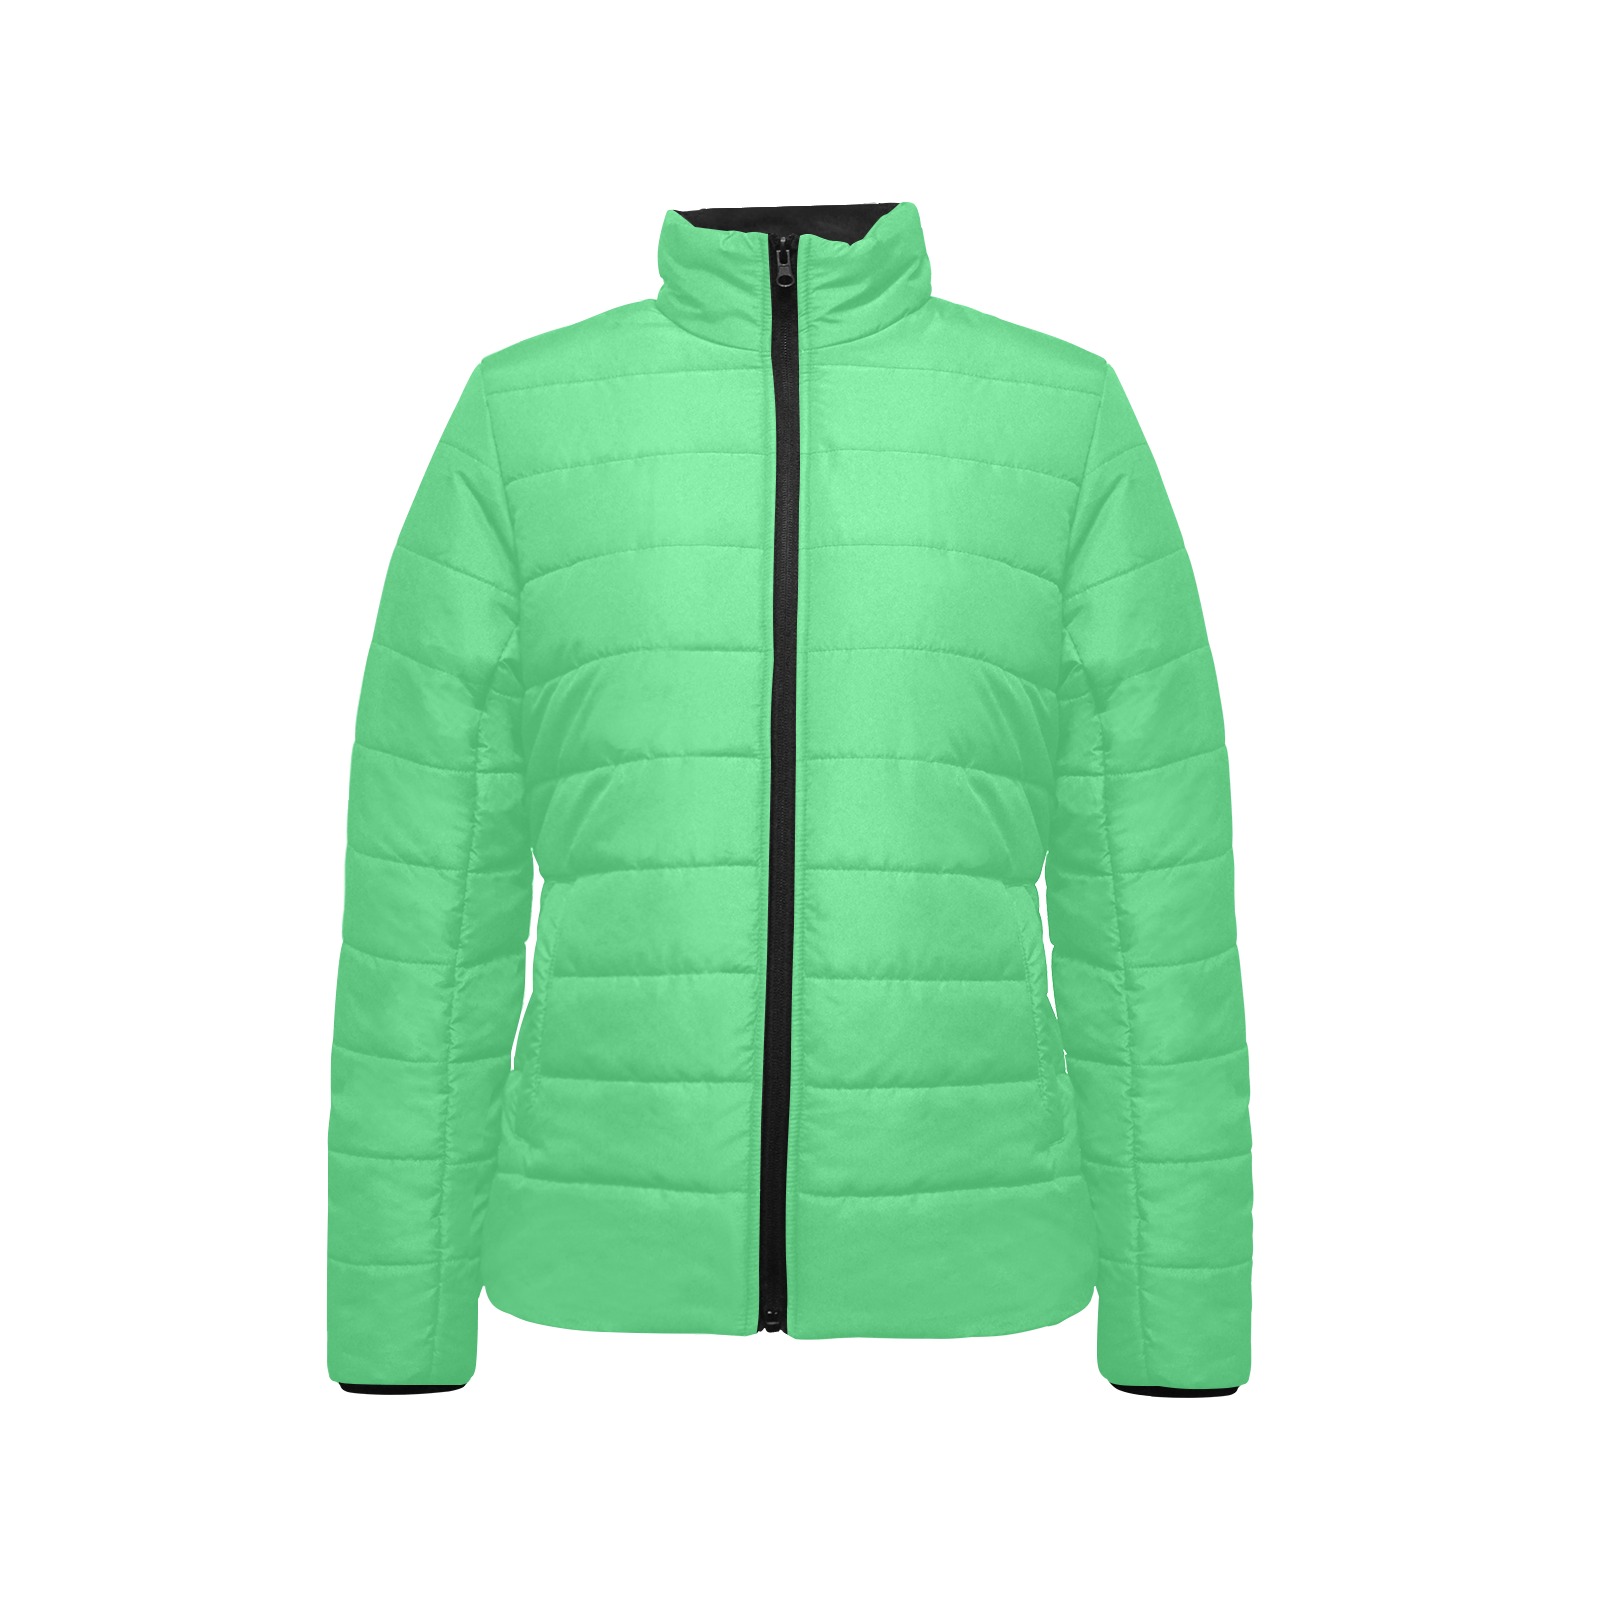 color Paris green Women's Stand Collar Padded Jacket (Model H41)